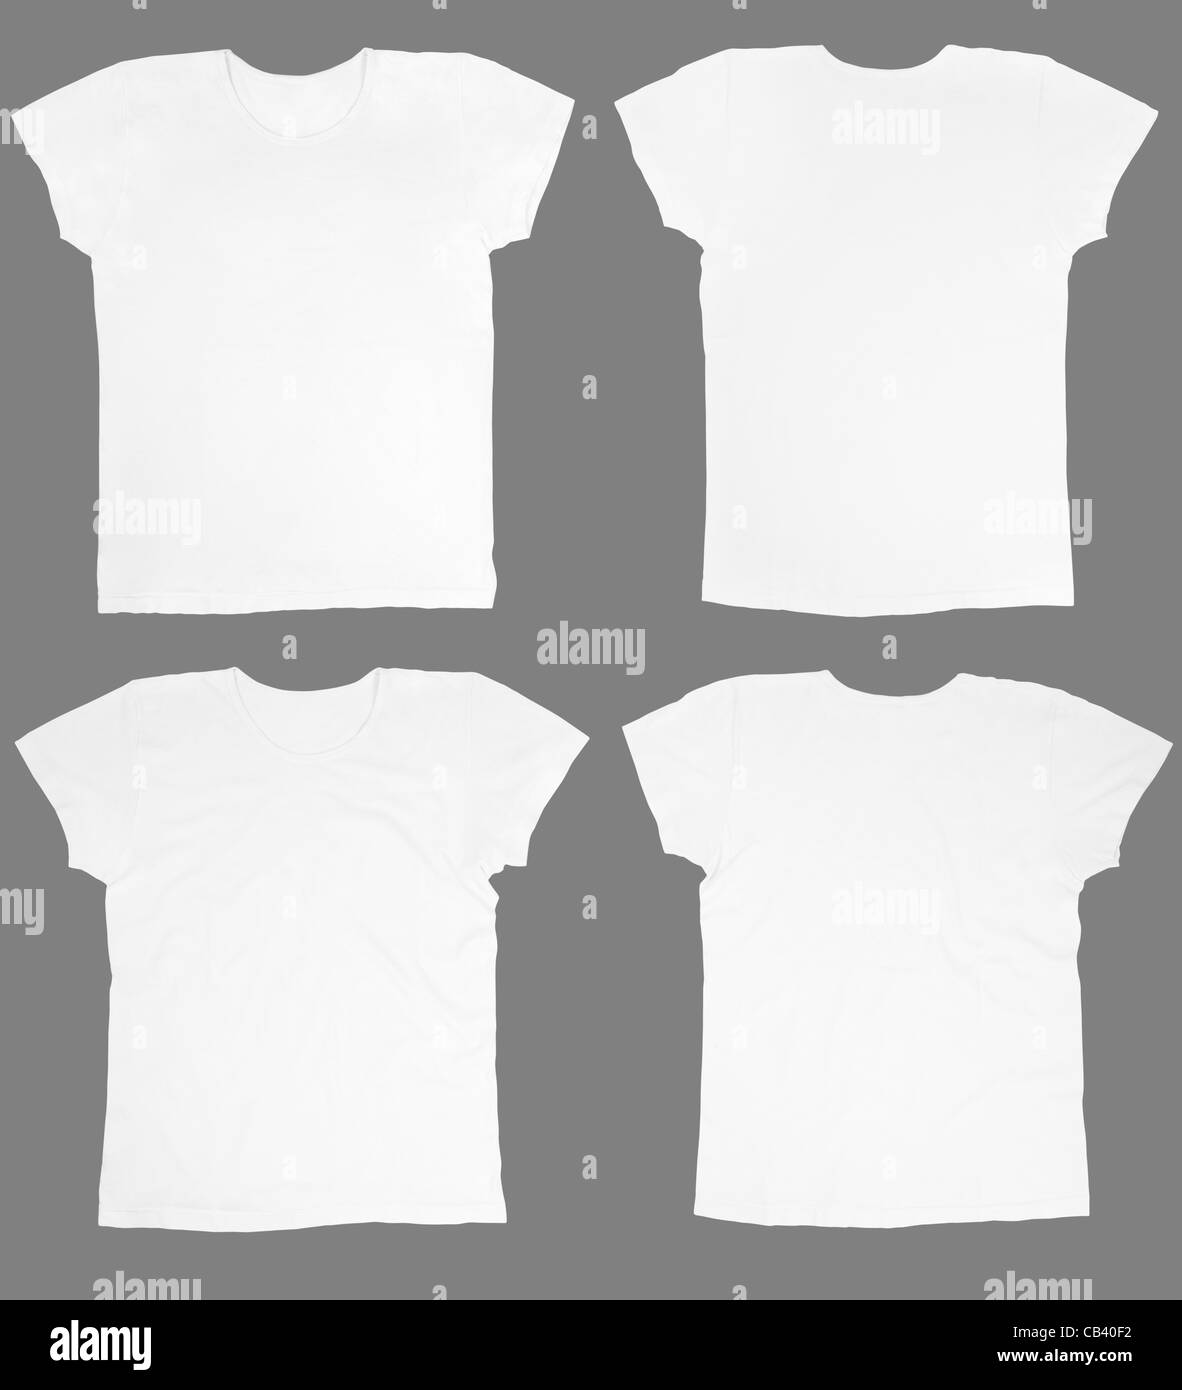 Blank white t-shirts front and back Stock Photo